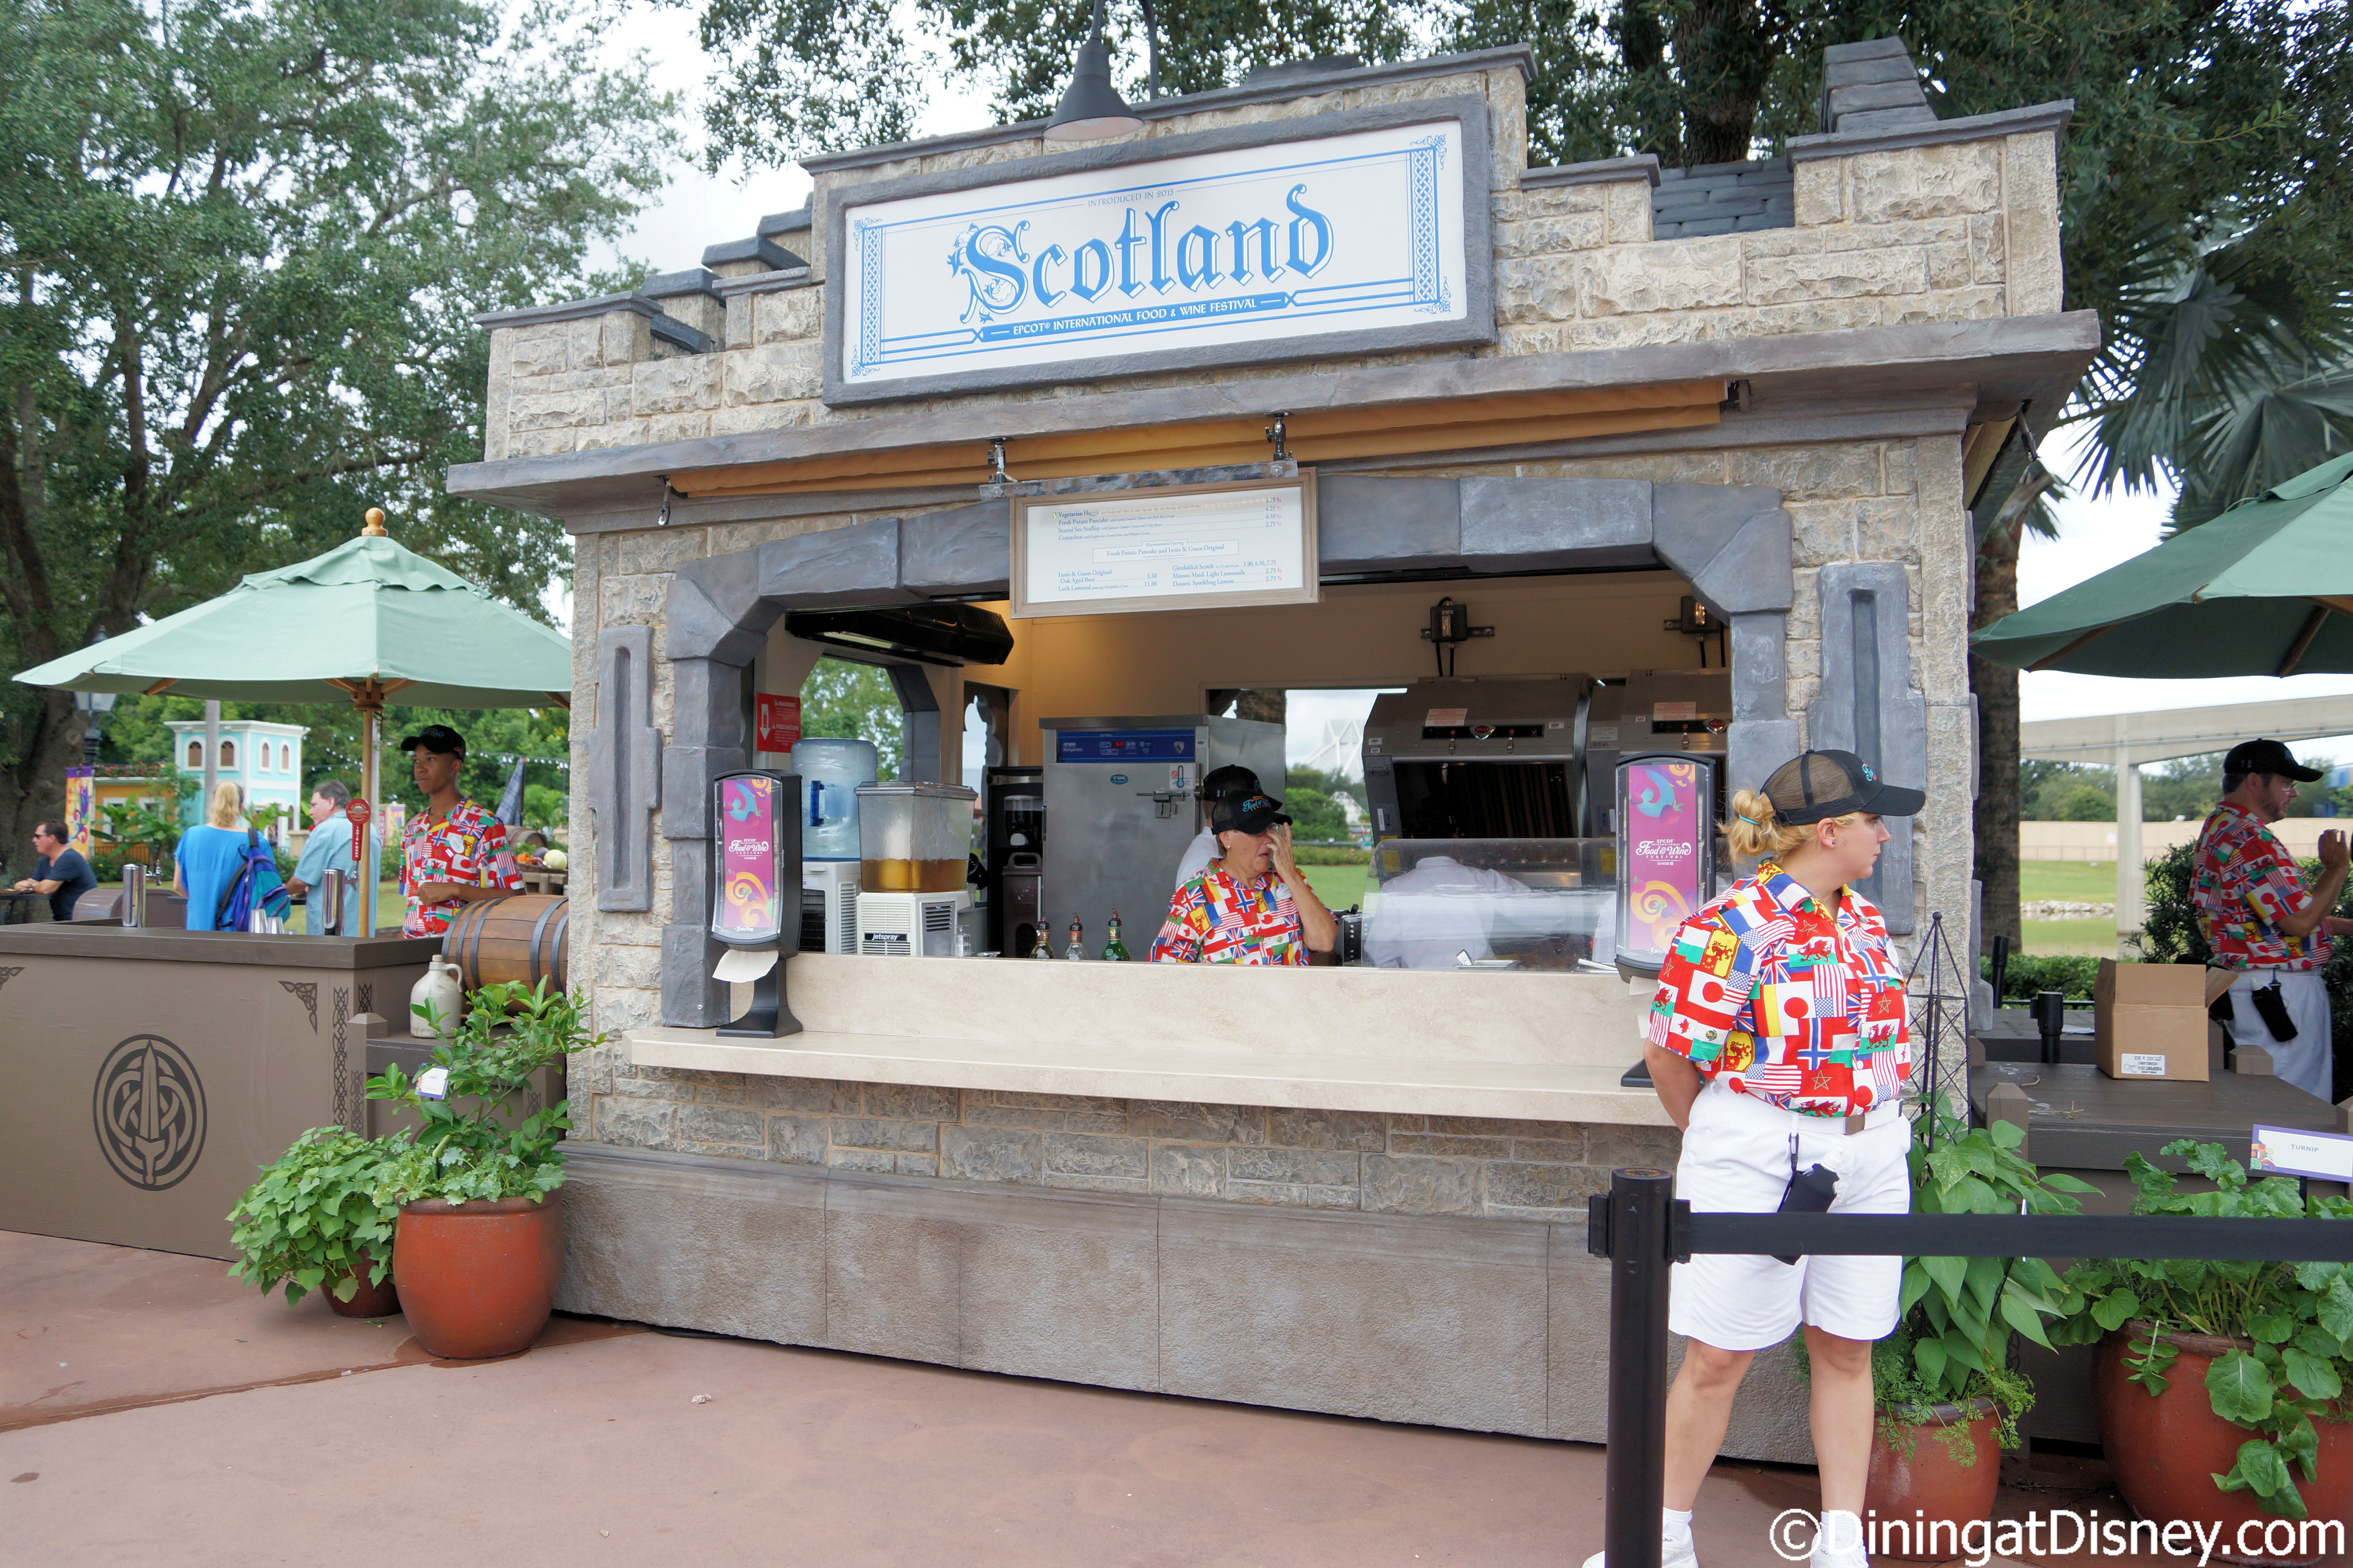 Scotland booth at the 2014 Epcot Food and Wine Festival